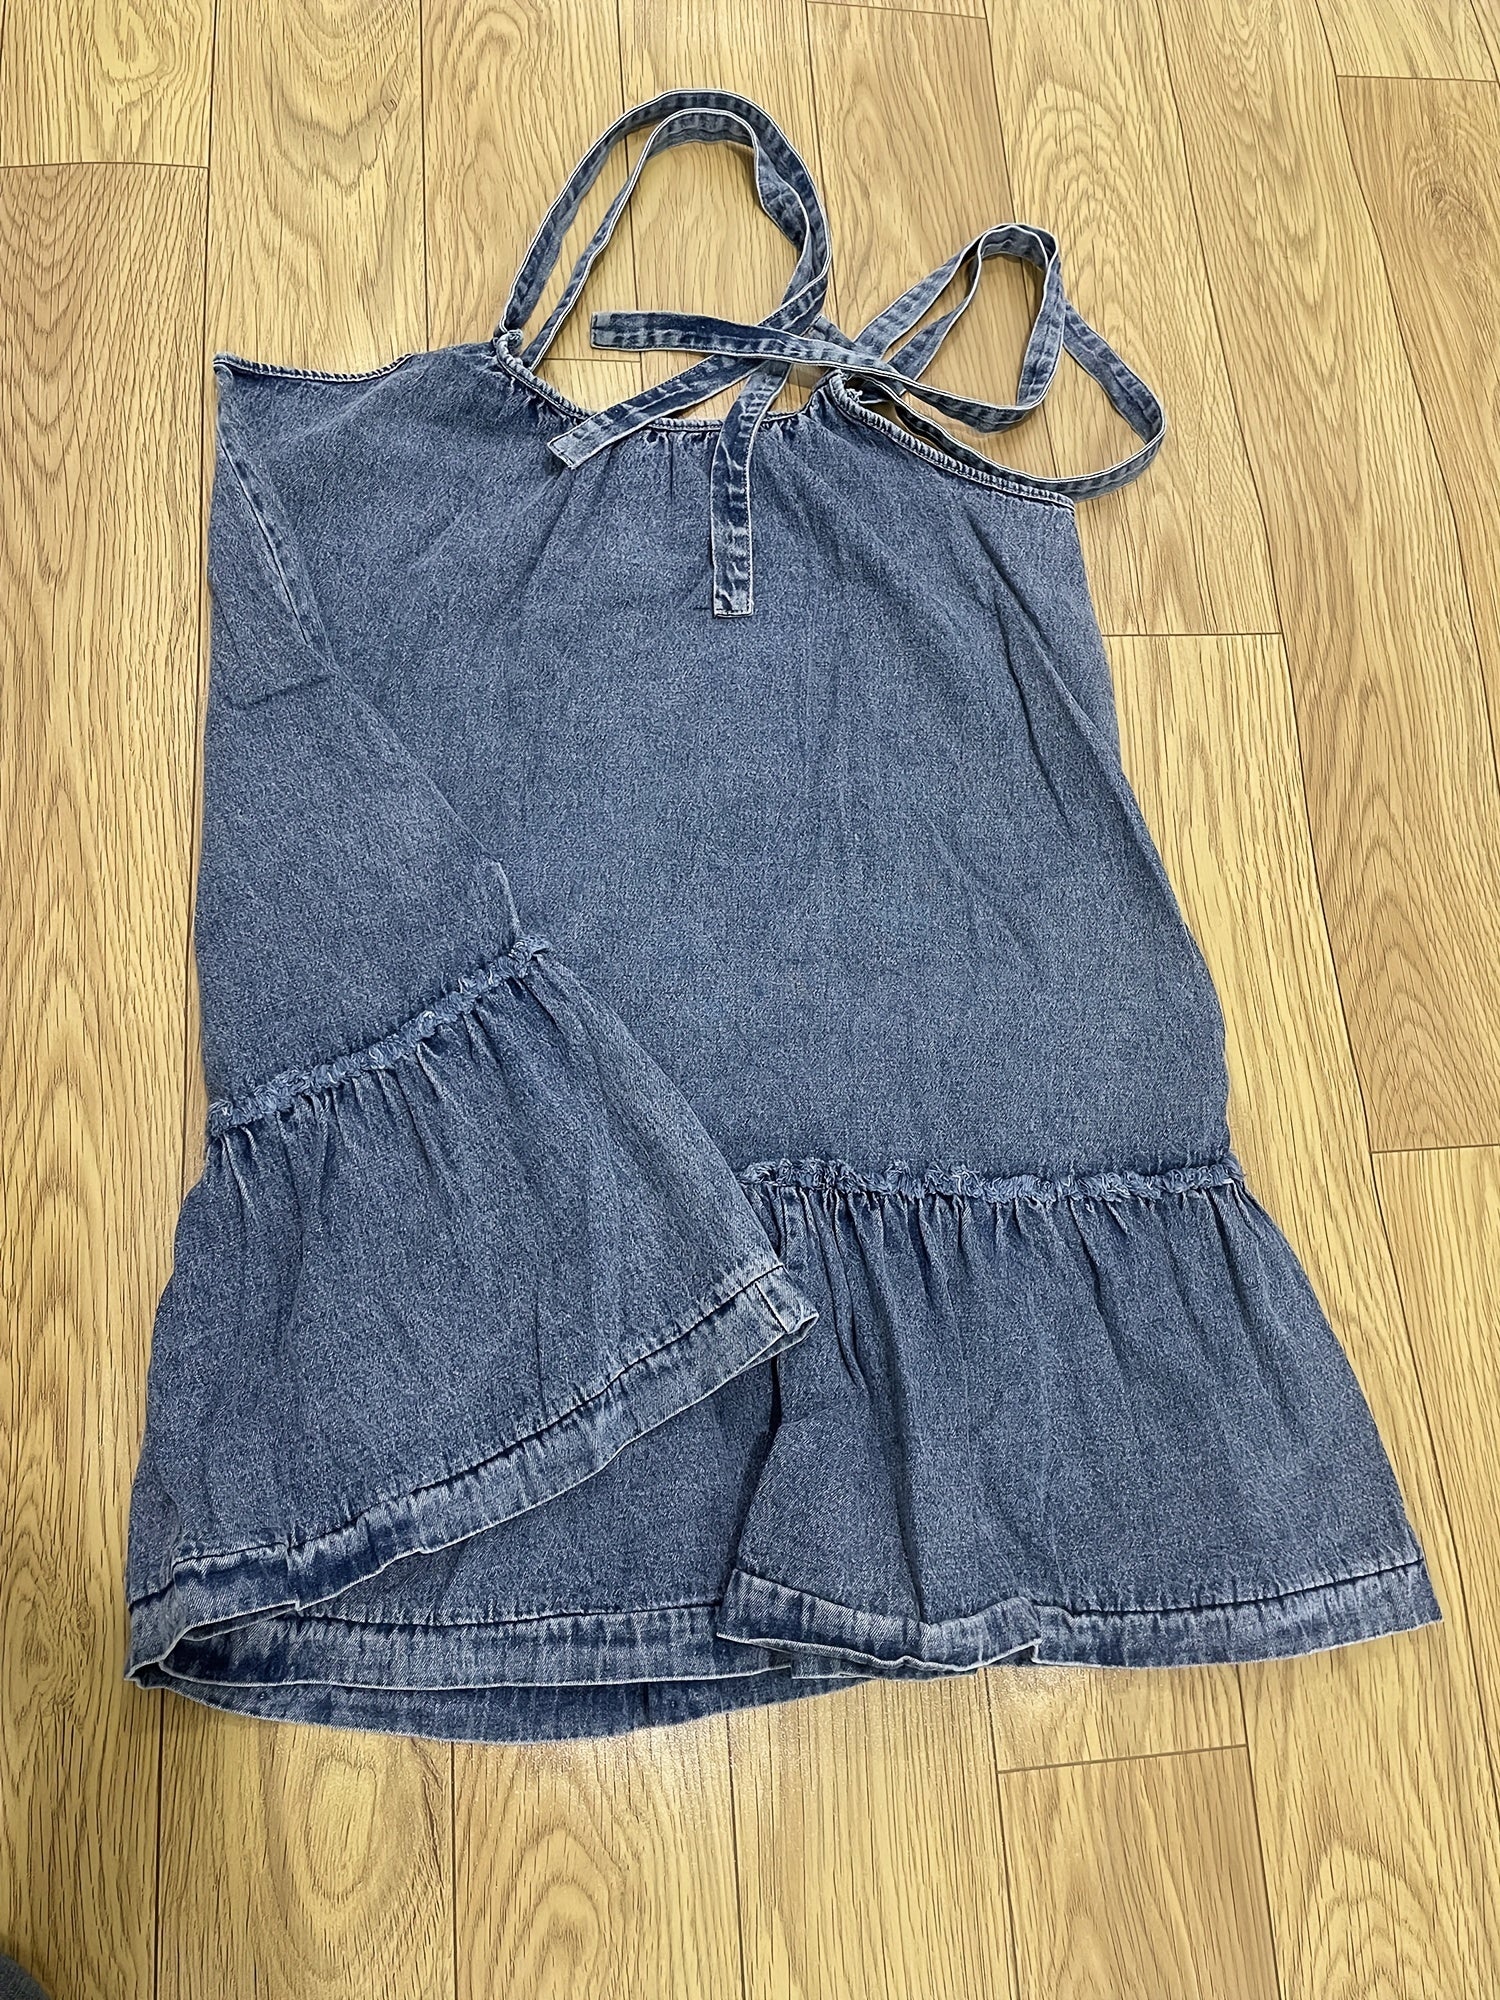 Lovevop-Hollow Out Ruched Adjustable Straps Denim Dress, Loose Sleeveless Casual Style Dress, Women's Denim Jeans & Clothing